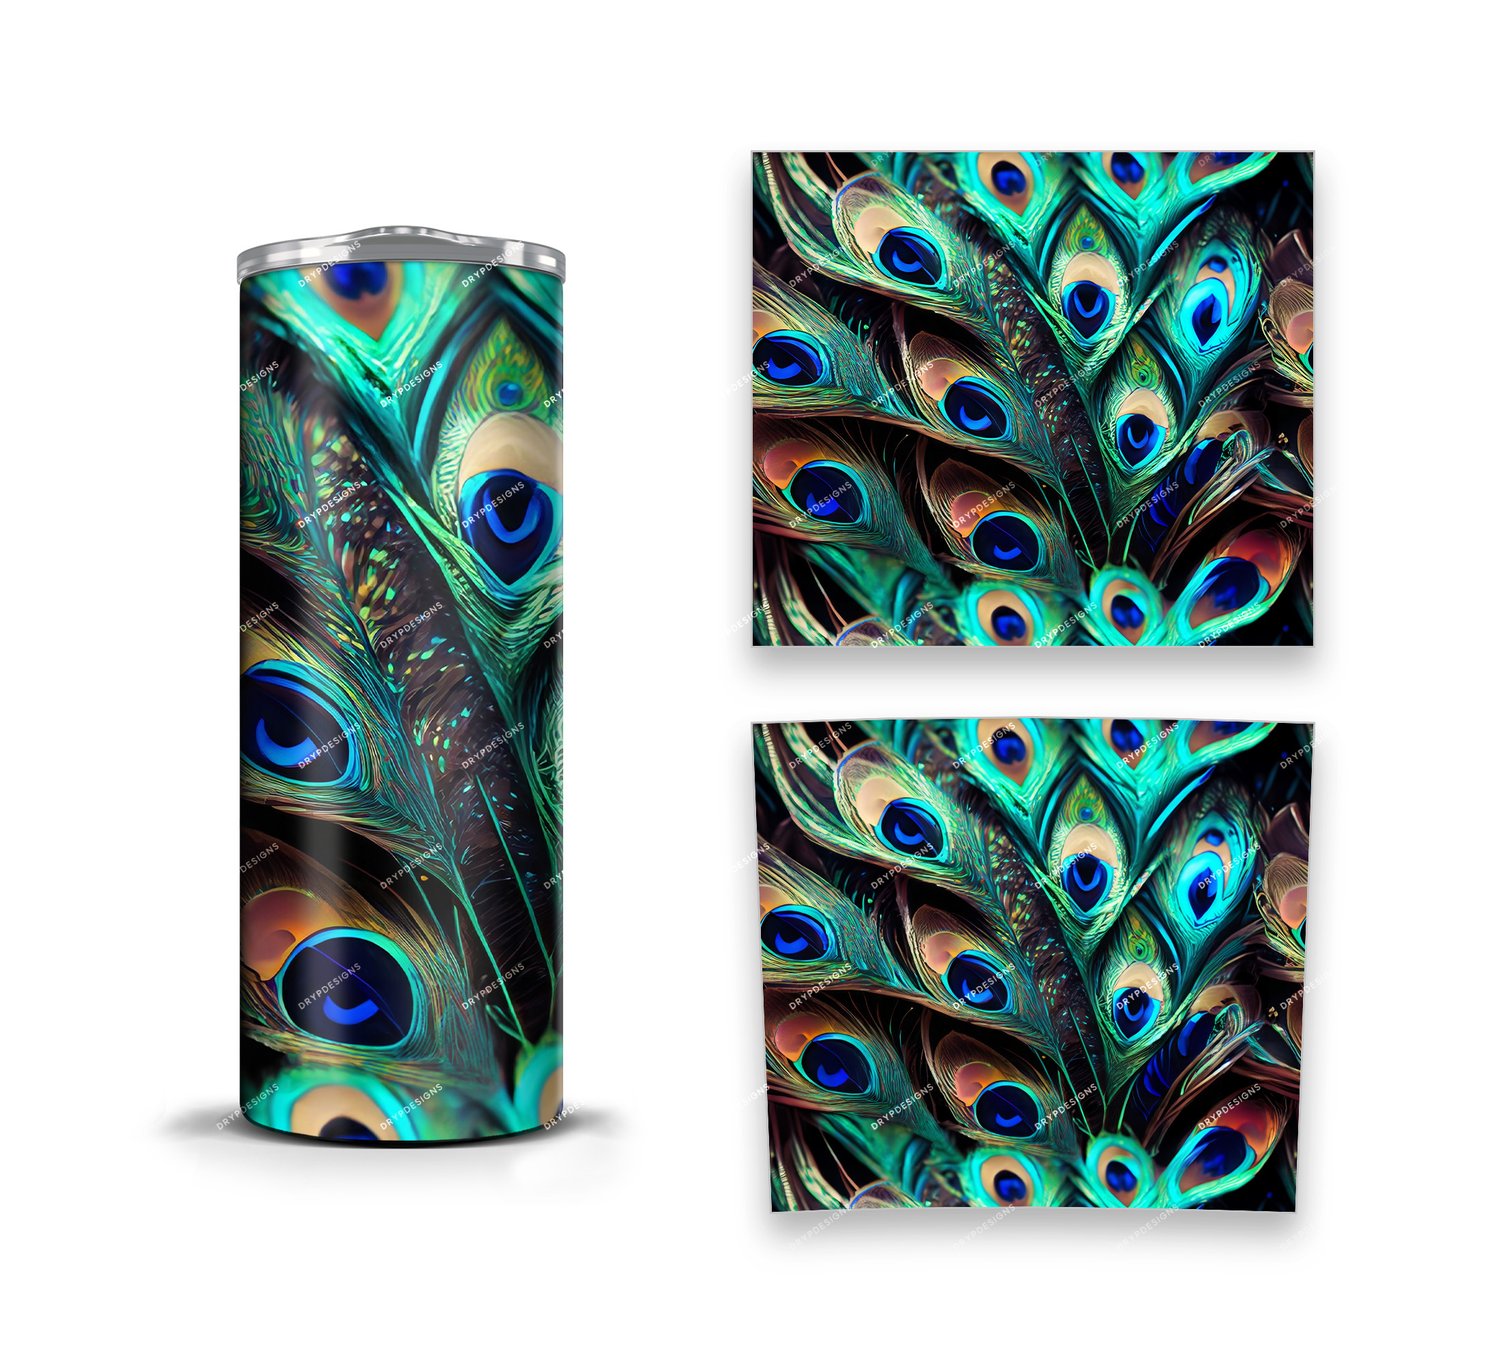 https://images.squarespace-cdn.com/content/v1/609701bc21f2ee5734517421/1688019586261-AARGQ45IHT0LY29638GO/Peacock+Feathers+Tumbler+Cover+WM+2.jpg?format=1500w